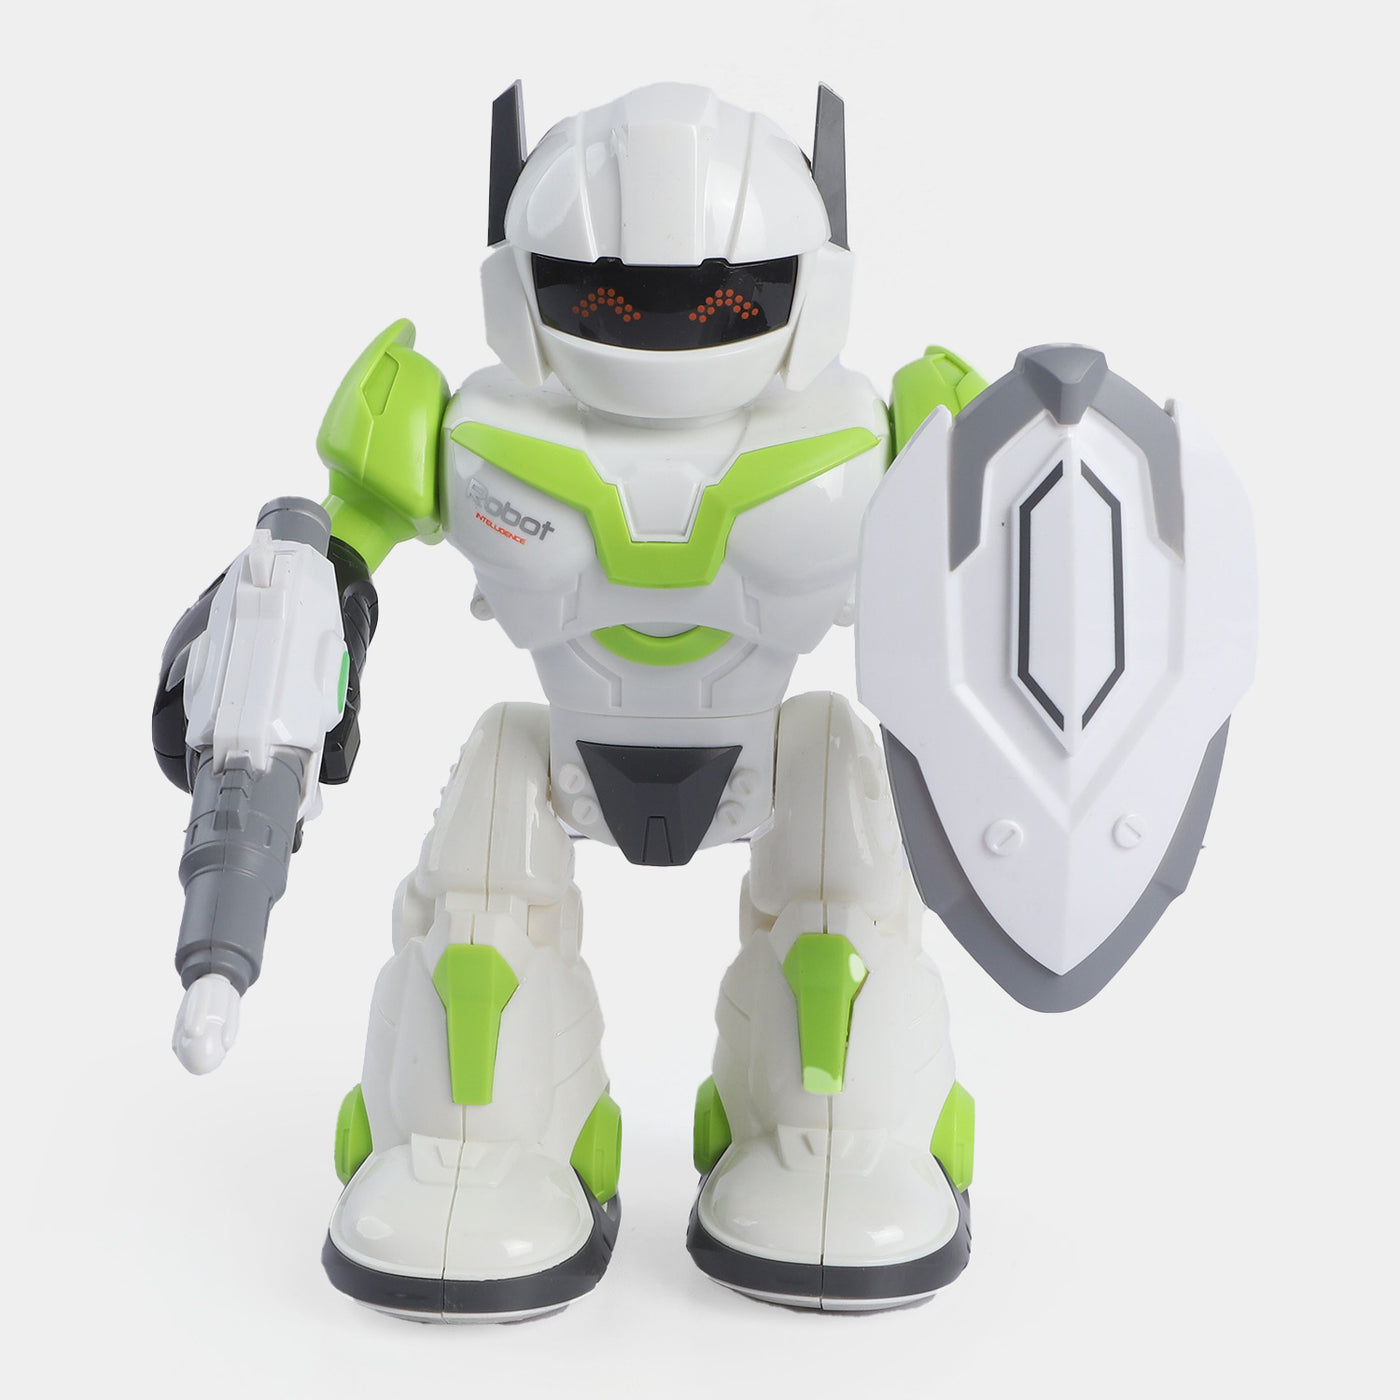 Cool Man Robot With Light & Sound For Kids